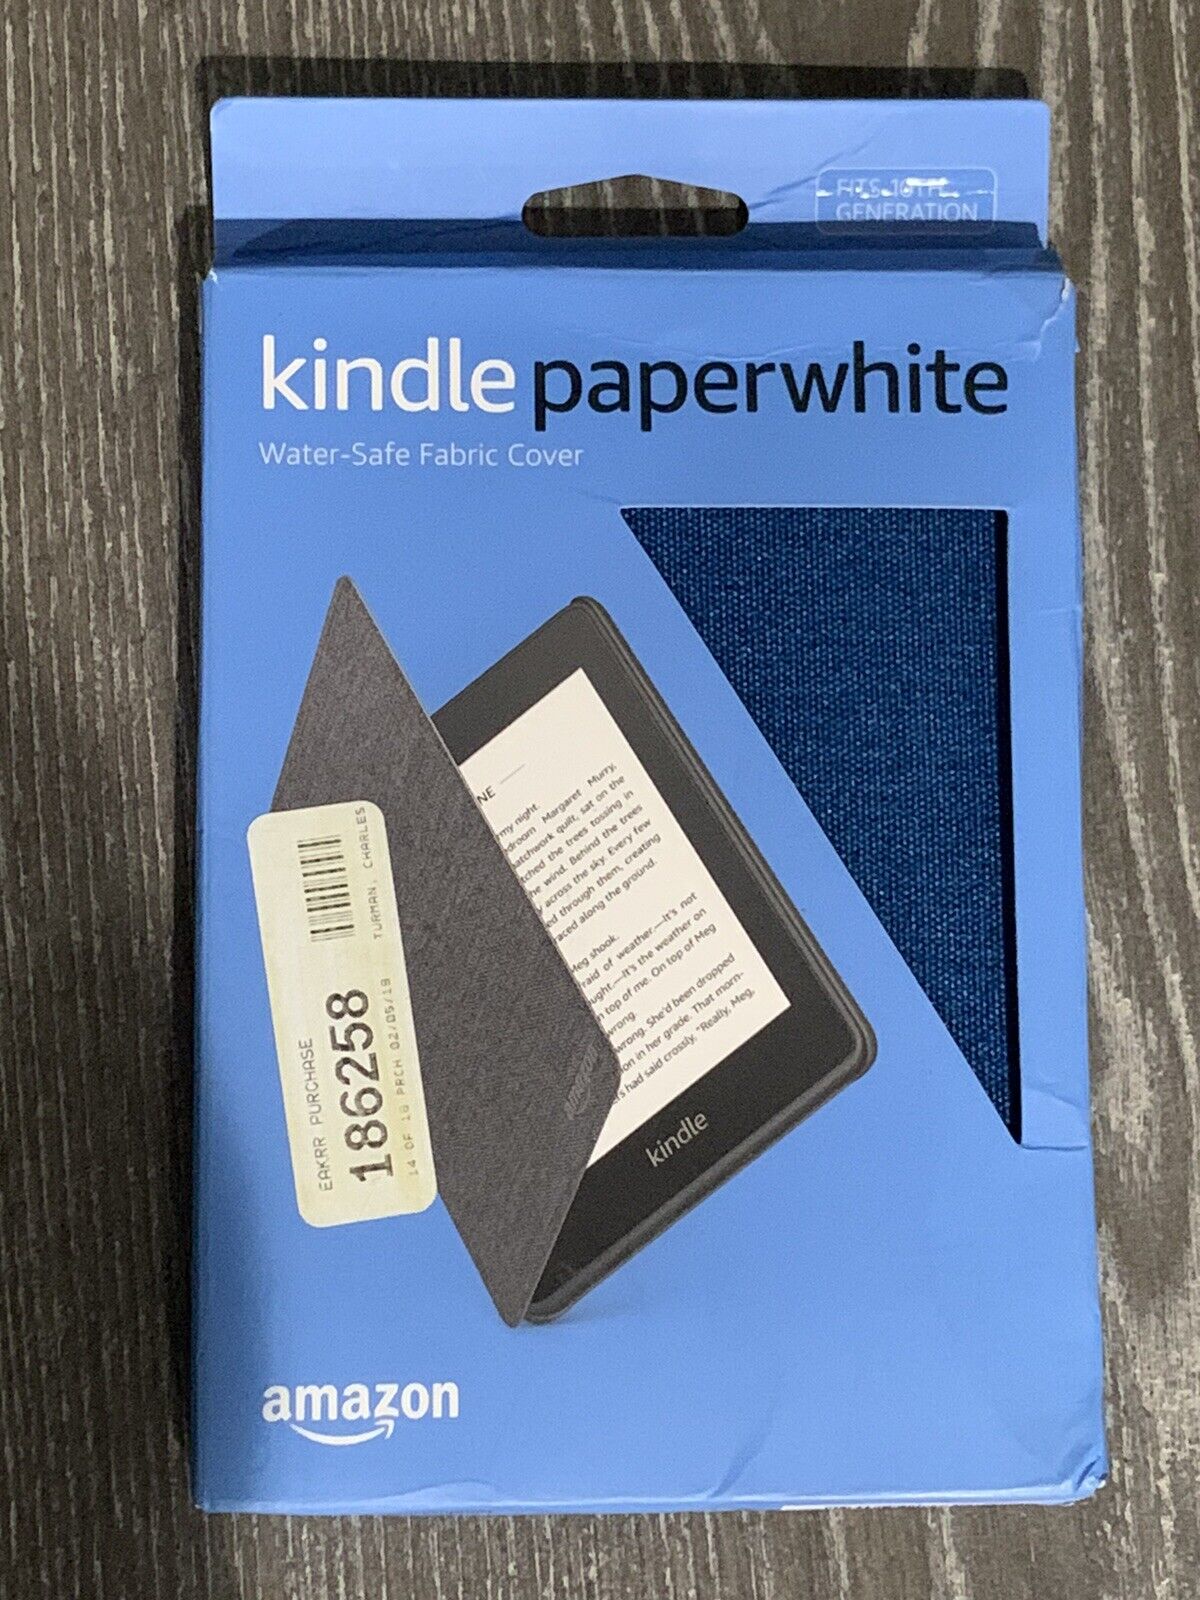 Amazon Water-Safe Fabric Cover for Amazon Kindle Paperwhite (10th Generation)